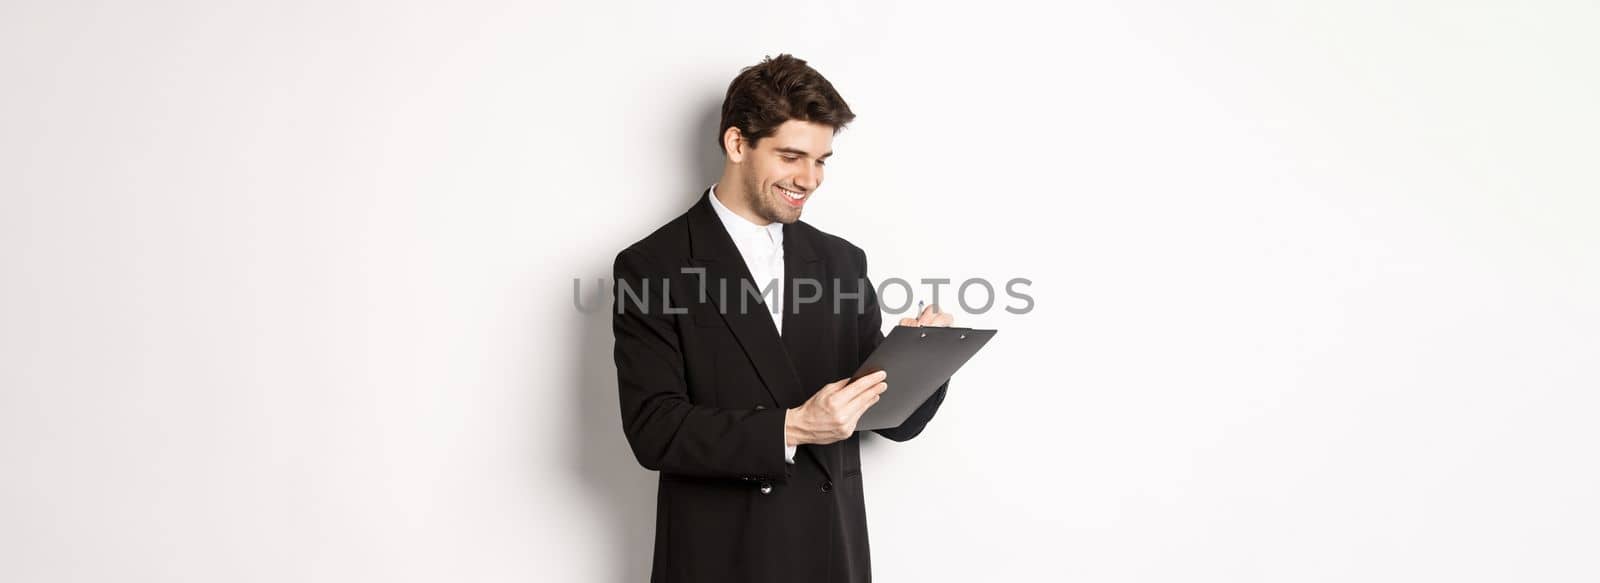 Image of handsome businessman in suit signing documents, looking at clipboard and smiling, standing against white background.